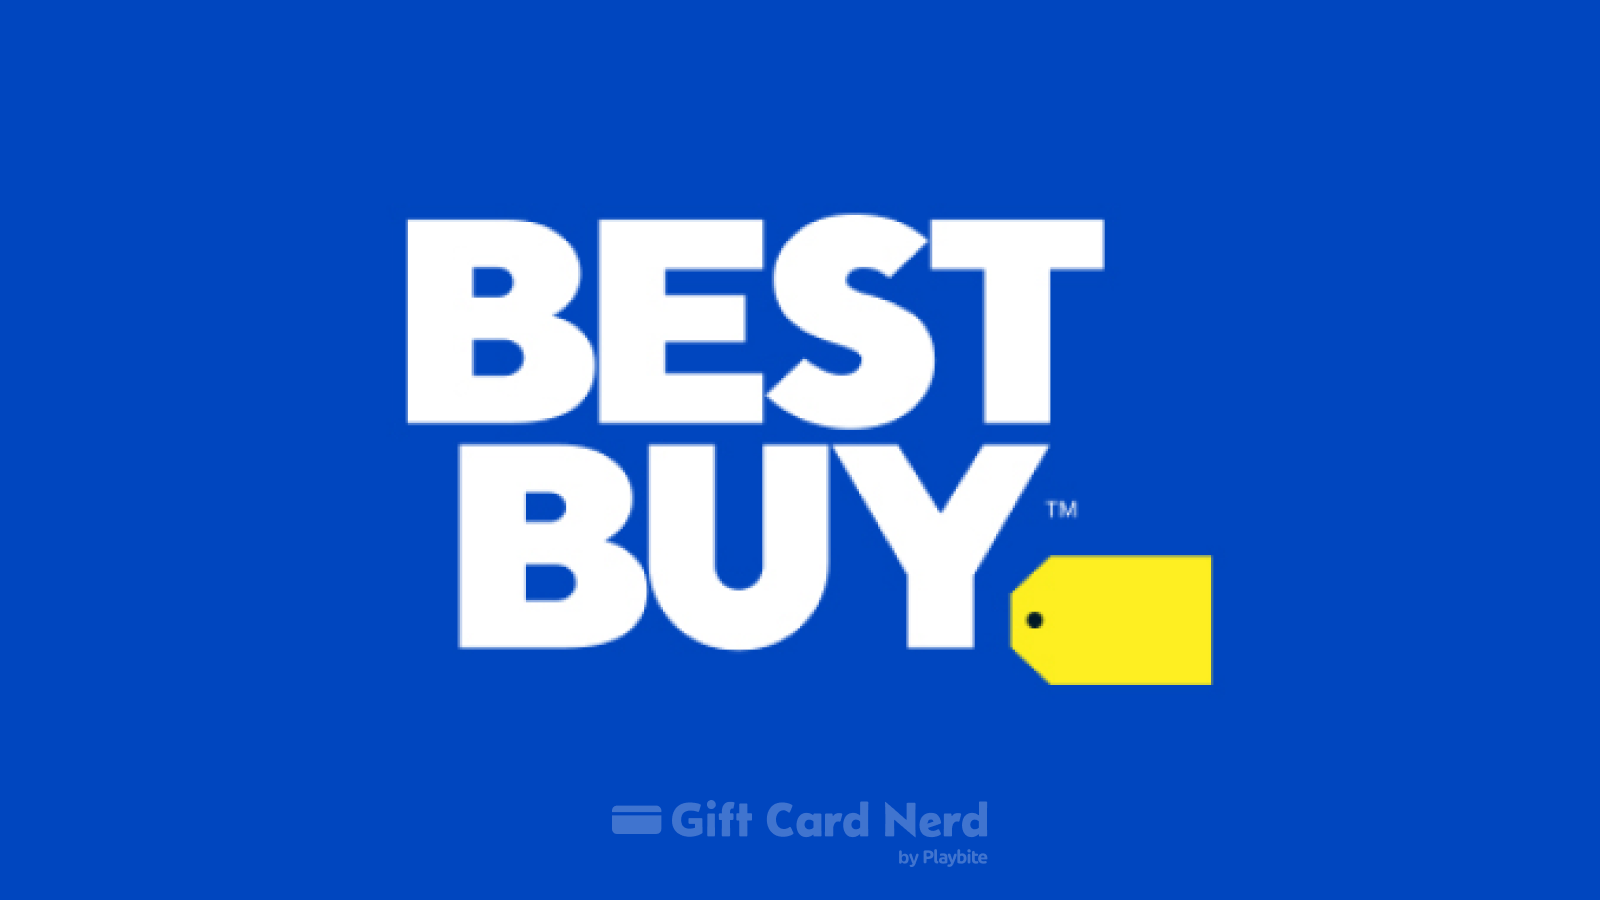 Can I Use a Best Buy Gift Card on Google Play Store?